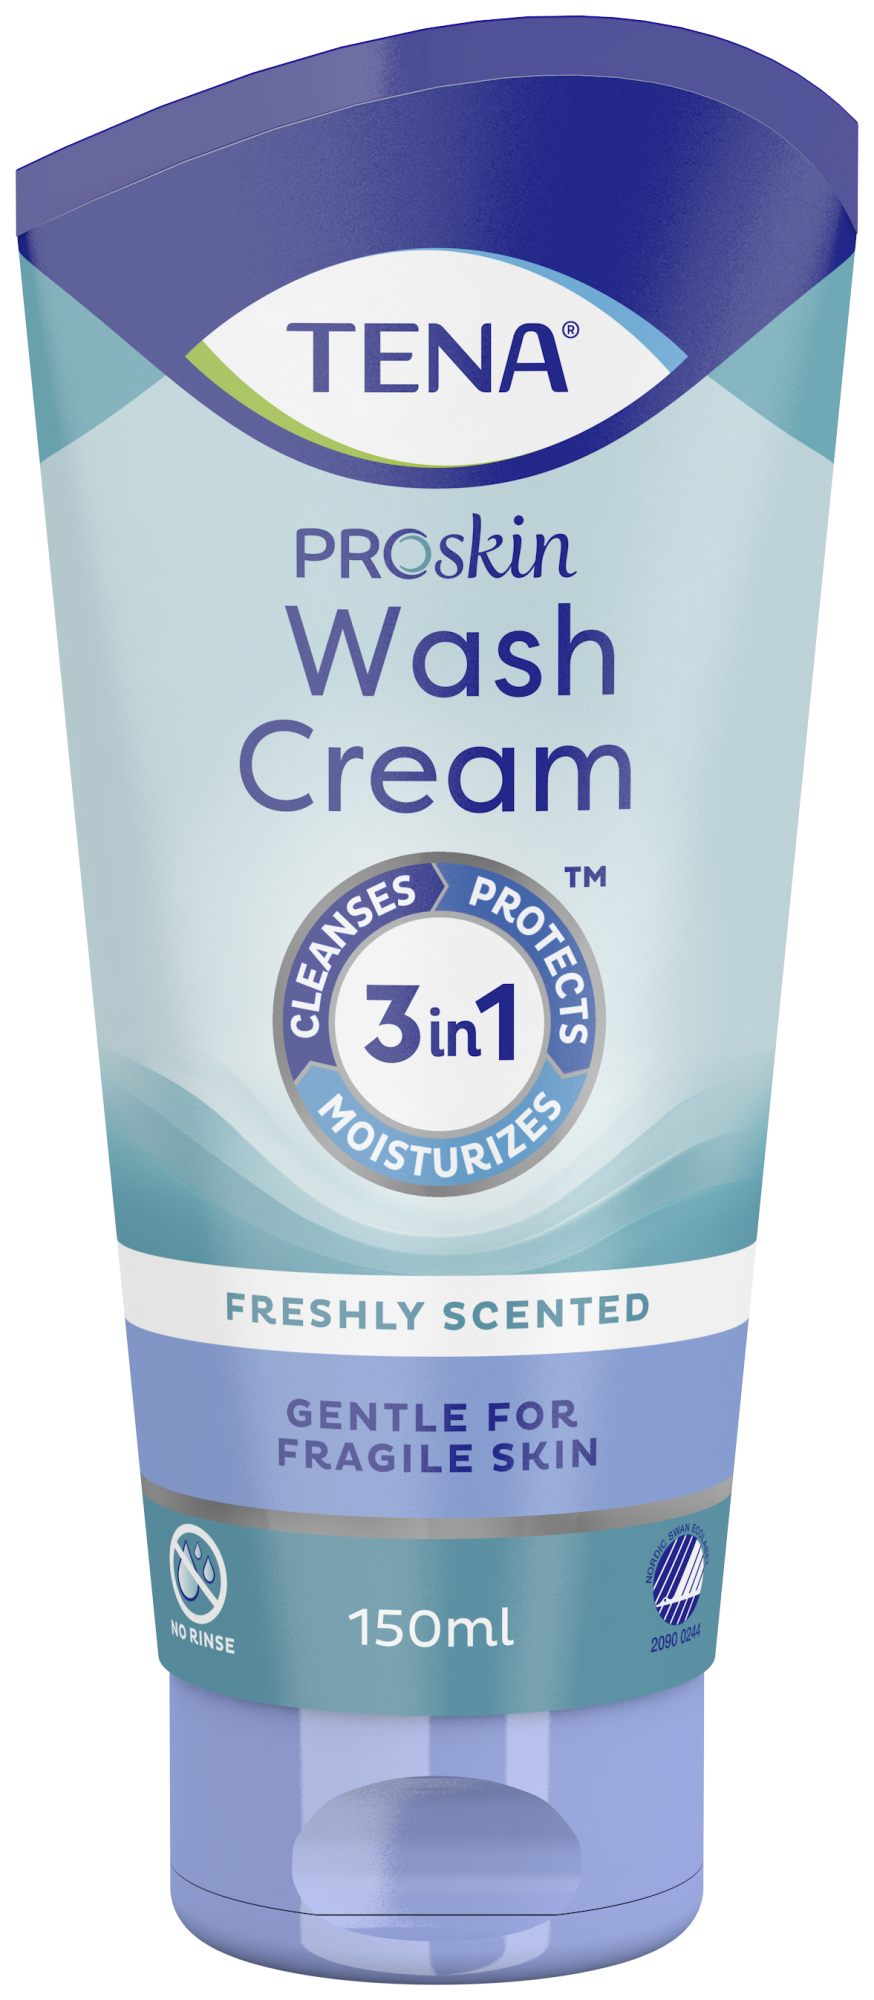 TENA Wash Cream | Easy full-body cleansing without soap and water